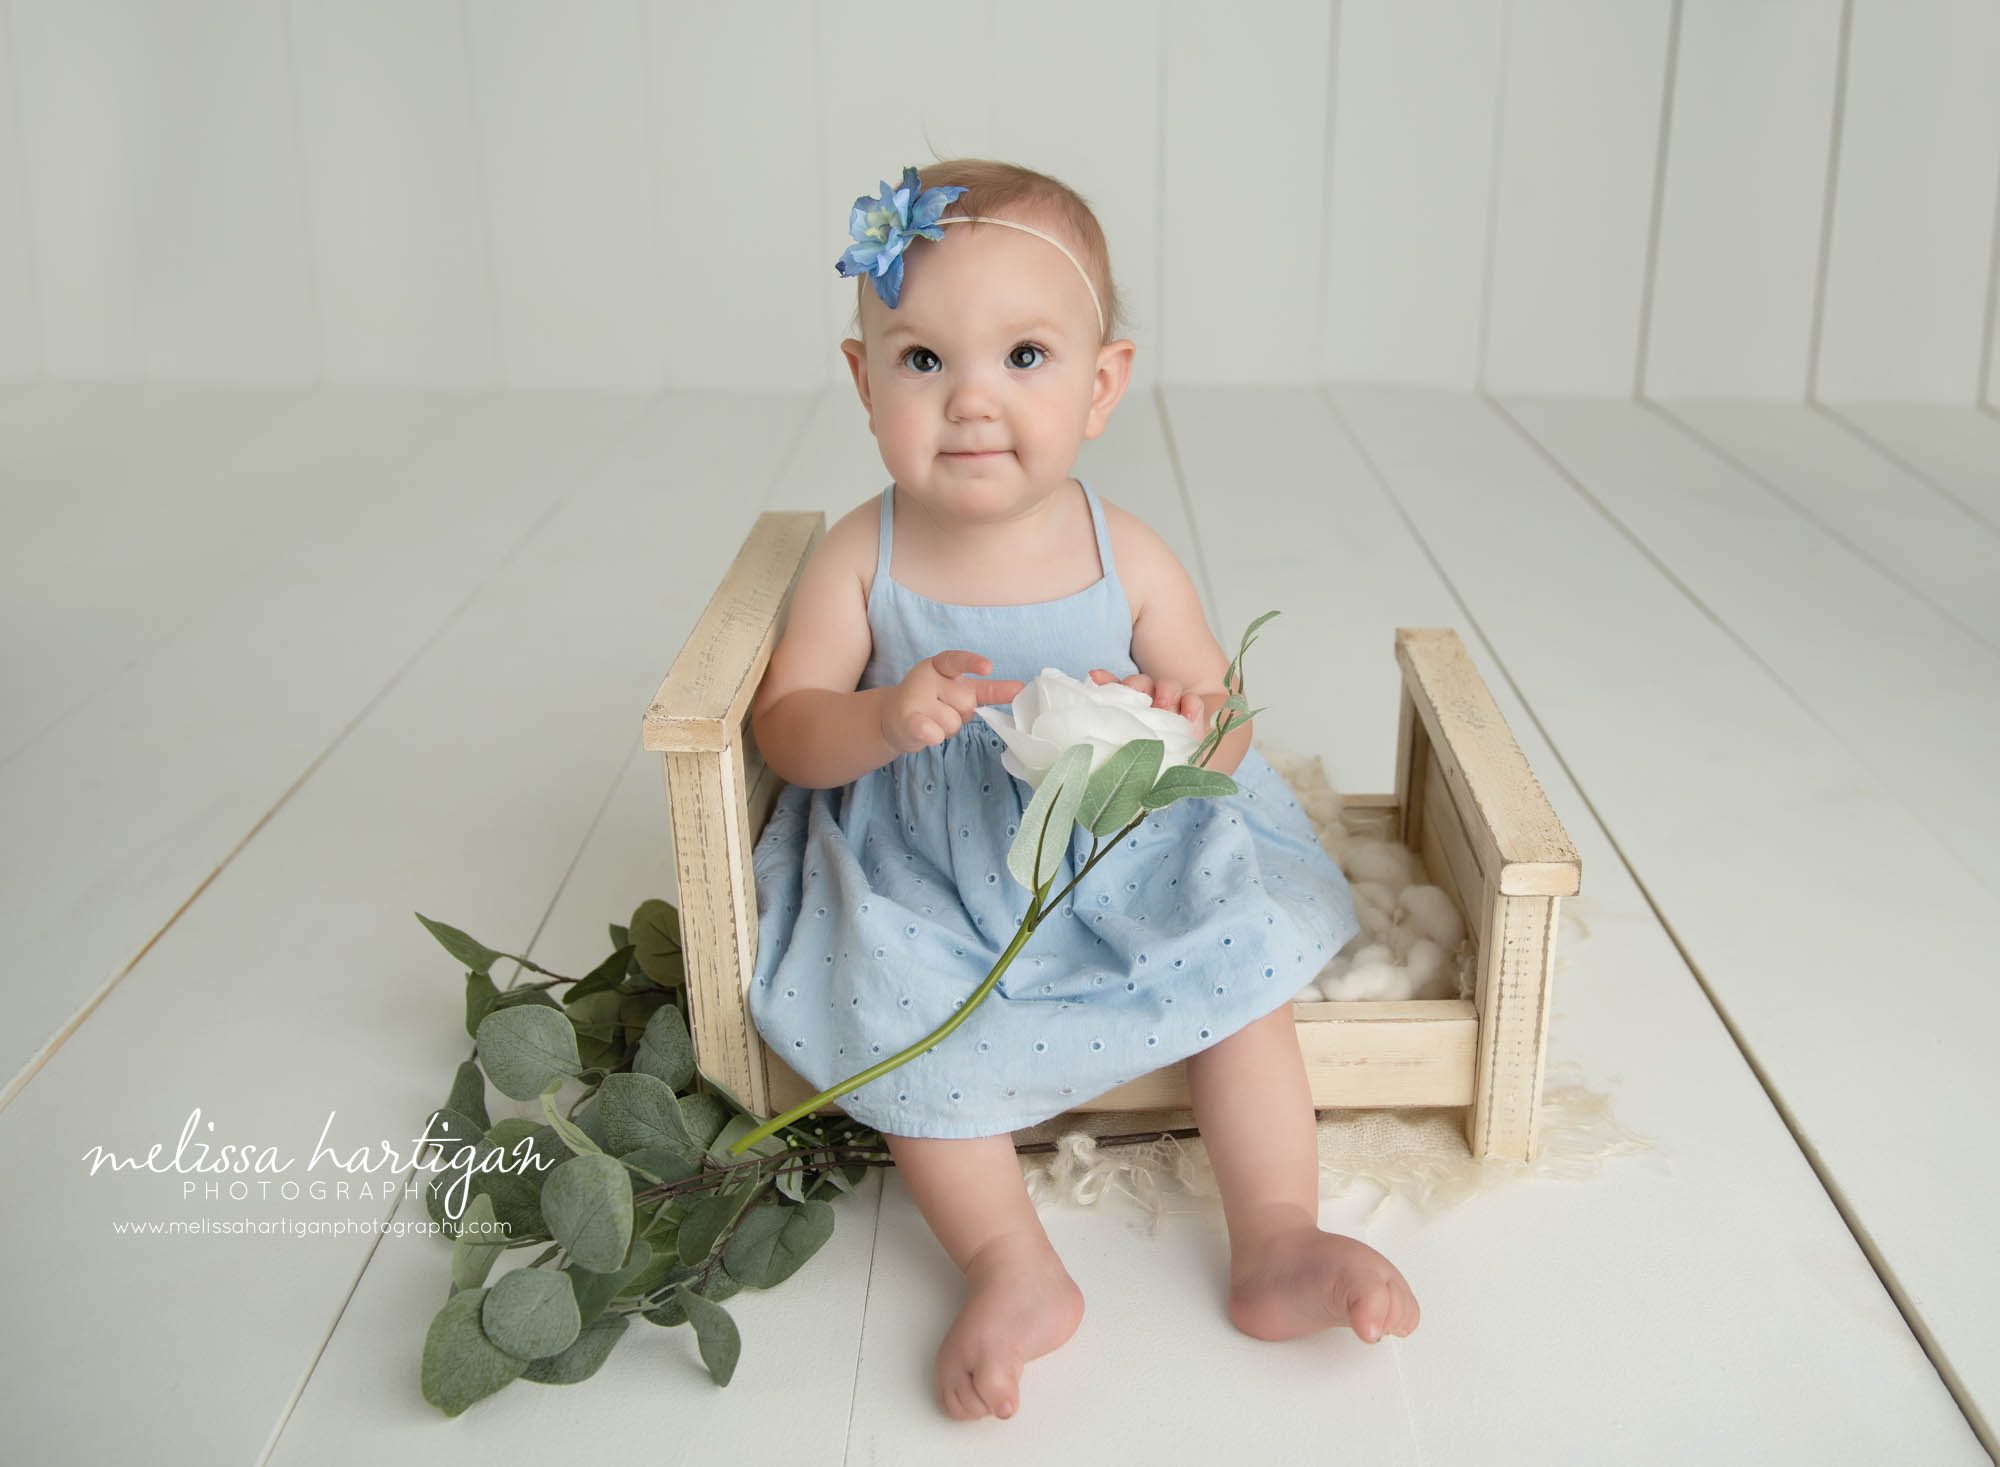 baby girl wearing light blue baby dress sitting on wooden bed prop holding white flower storrs mansfield baby photography